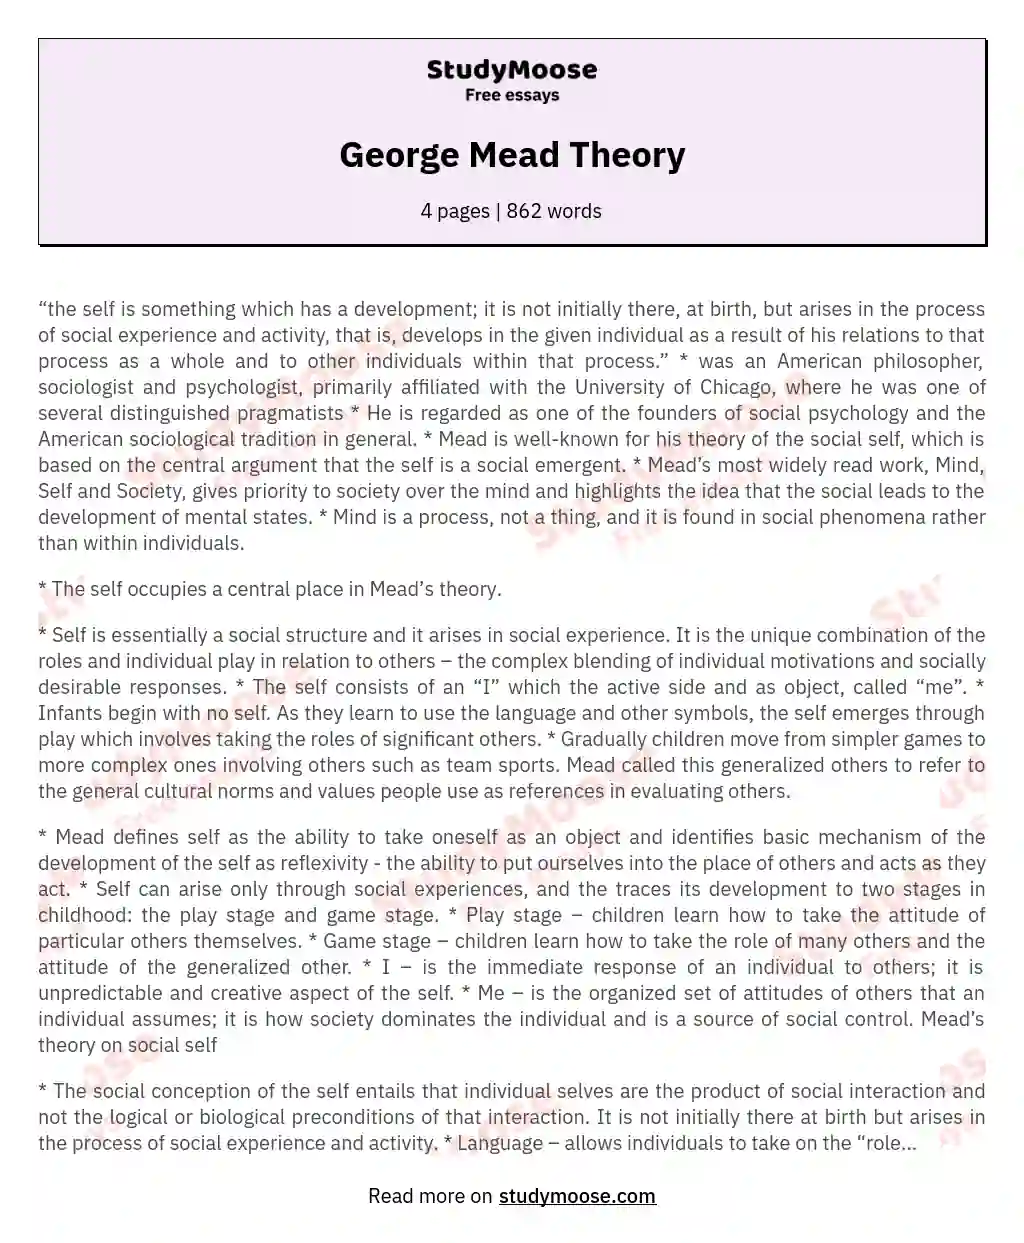 George Mead Theory essay